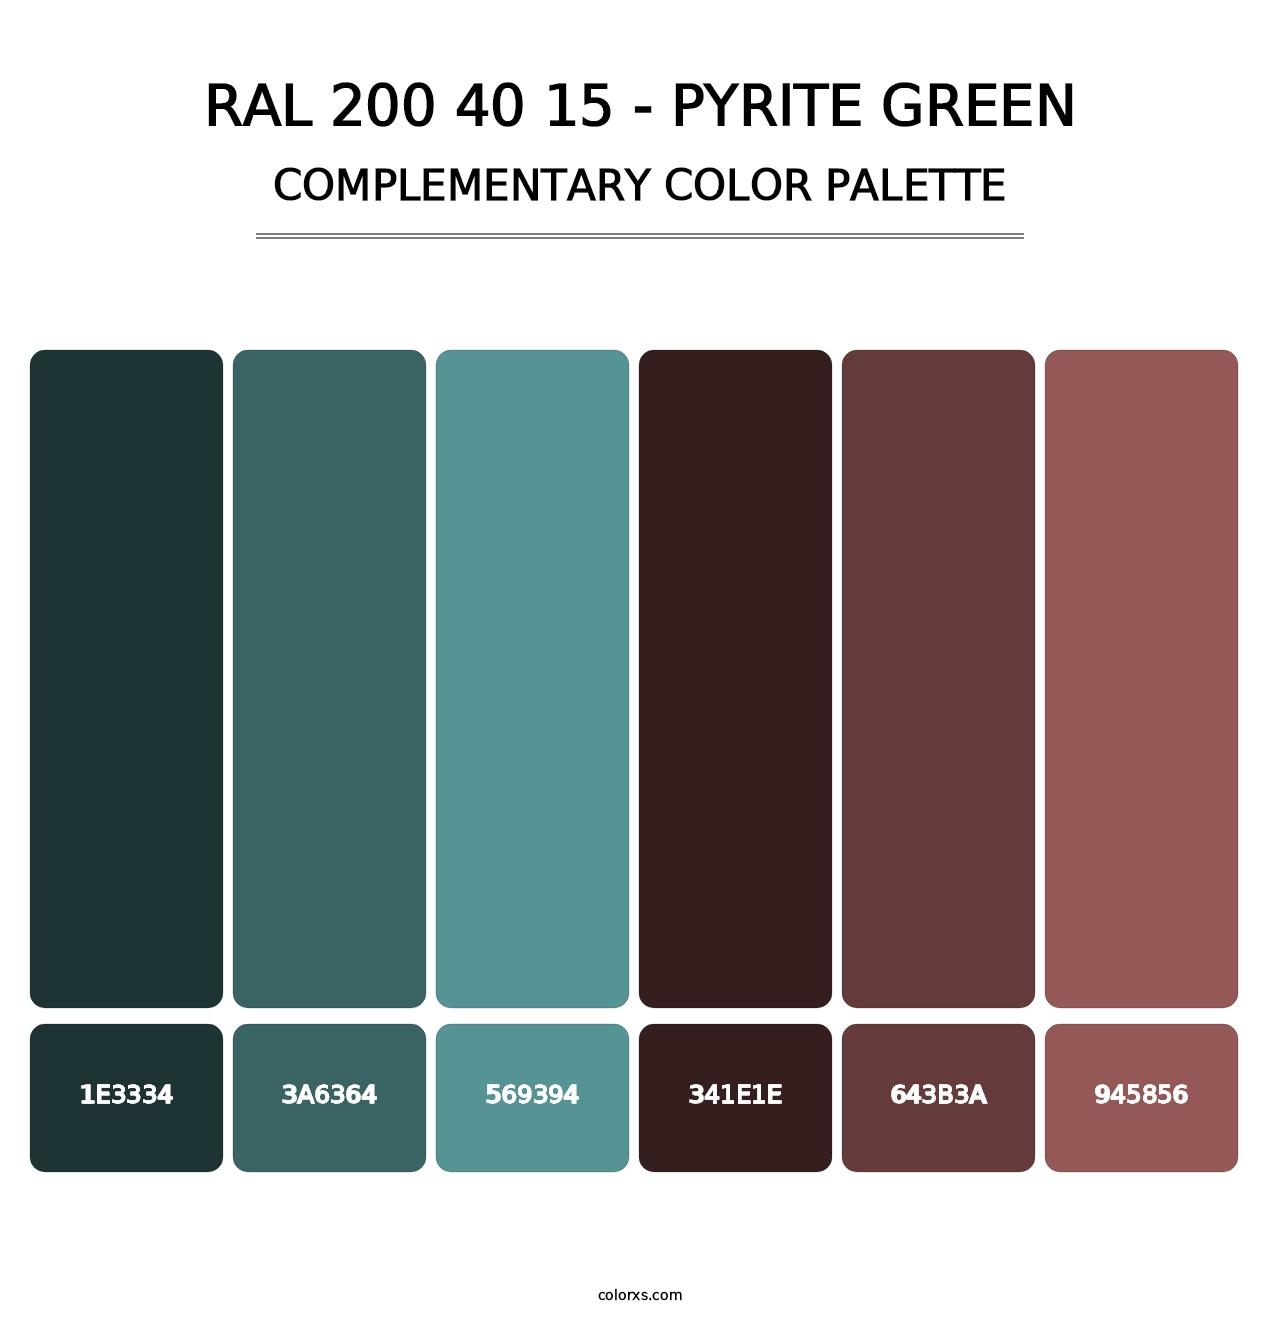 RAL 200 40 15 - Pyrite Green - Complementary Color Palette